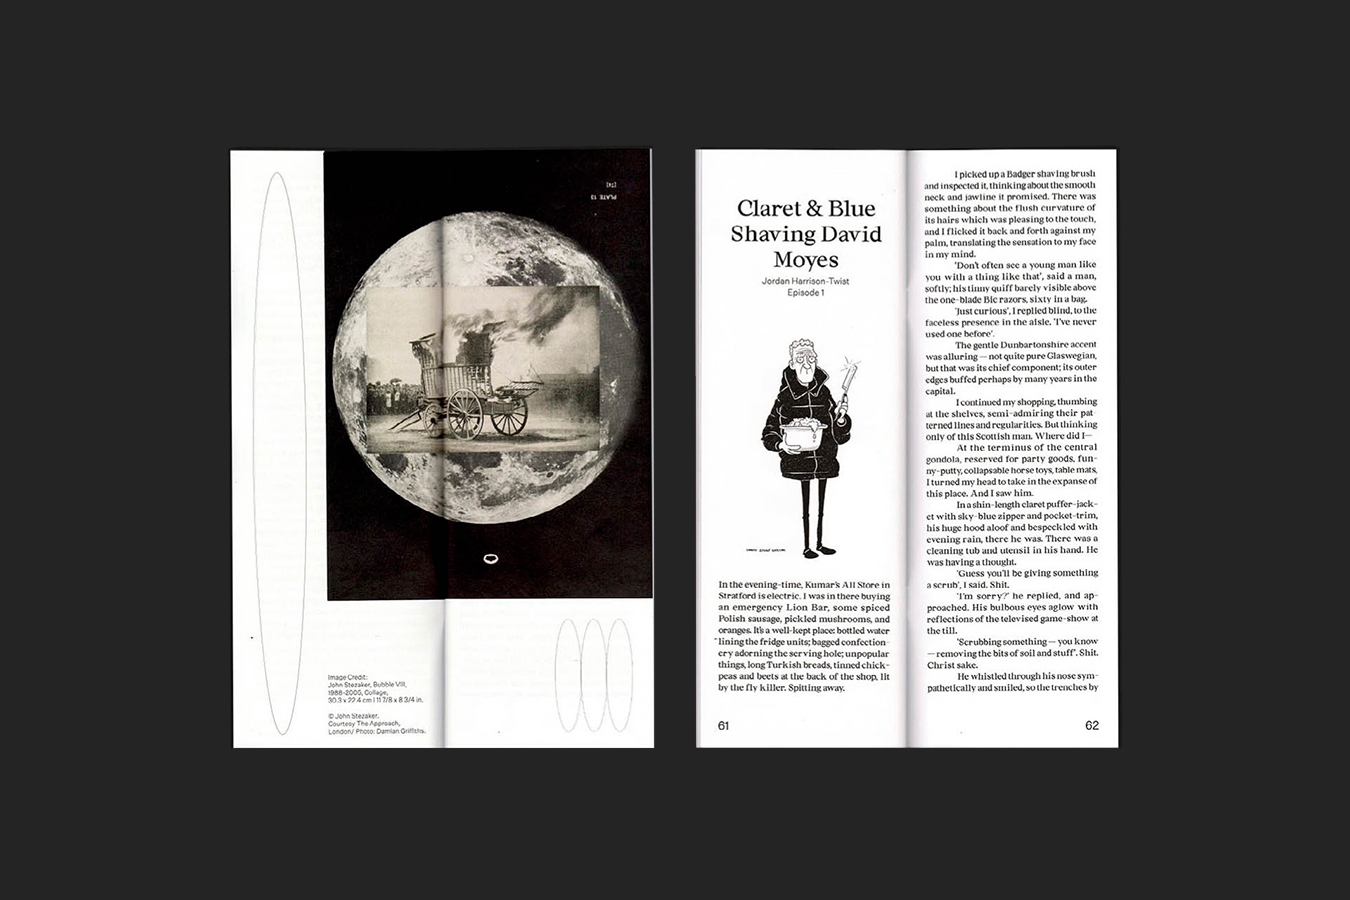 An image of the iiii publication, showing another chapter of the publication, and how Studio Hyte used images & dots to create dynamic and playful layouts